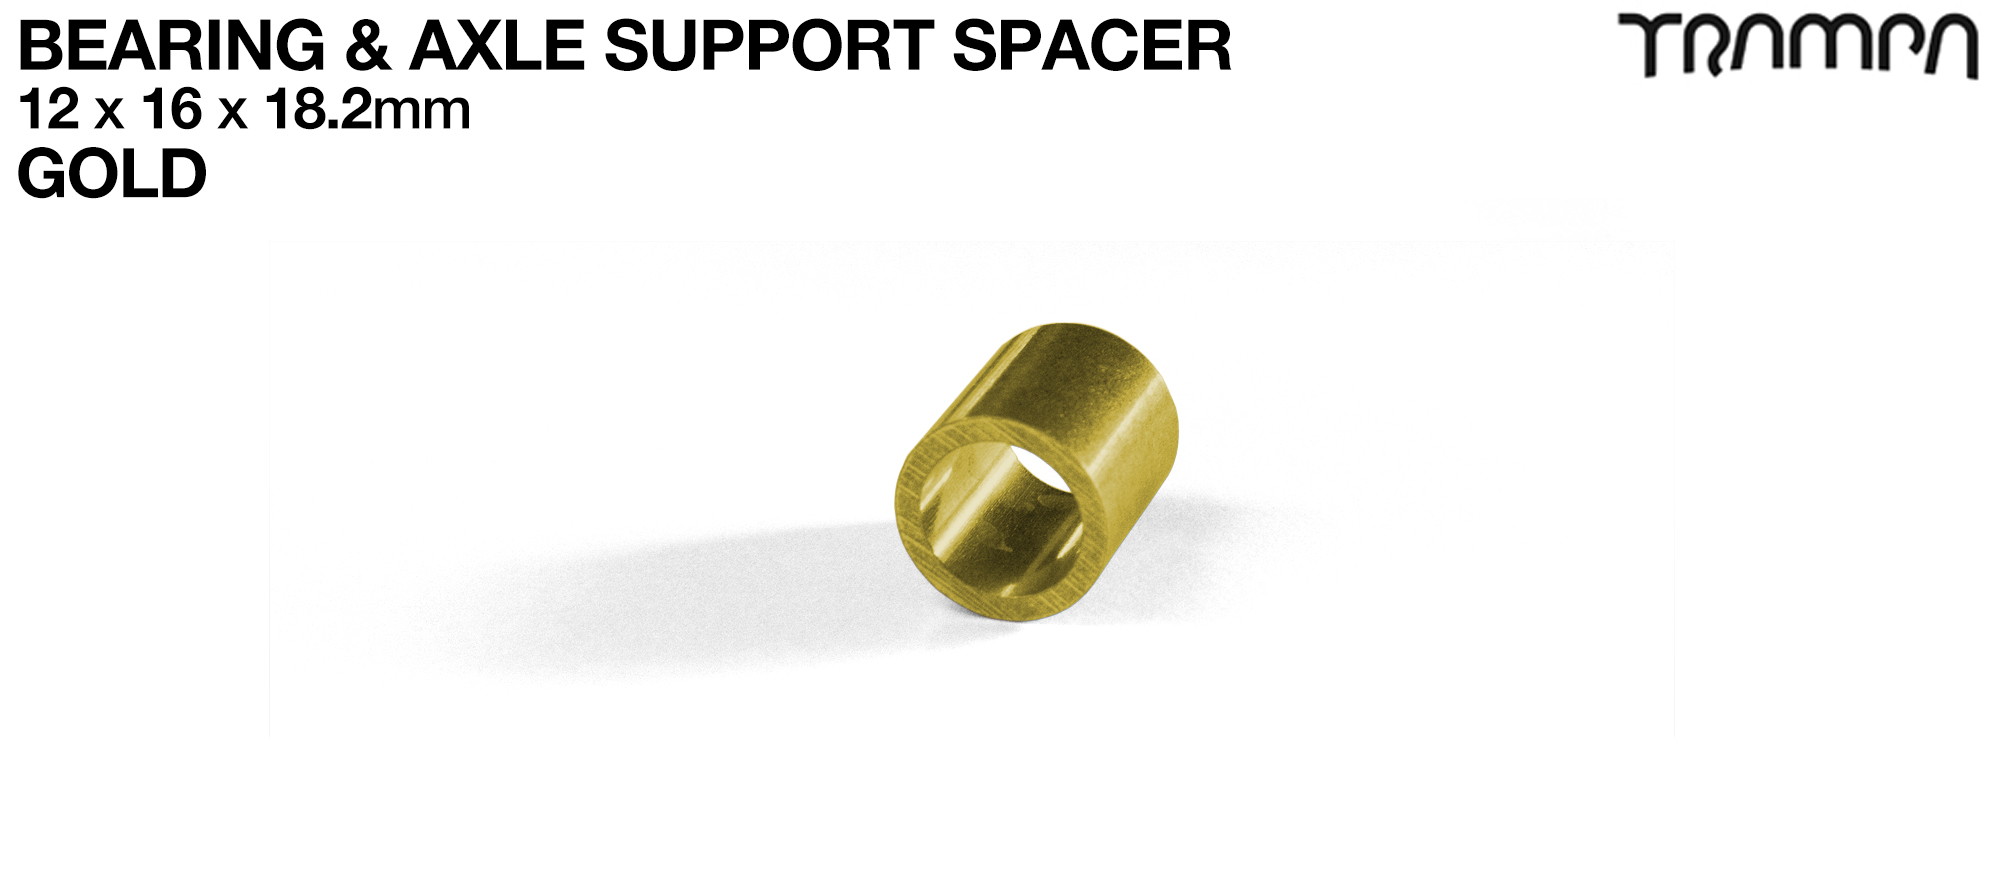 18.2mm Wheel Support Spacers - GOLD 